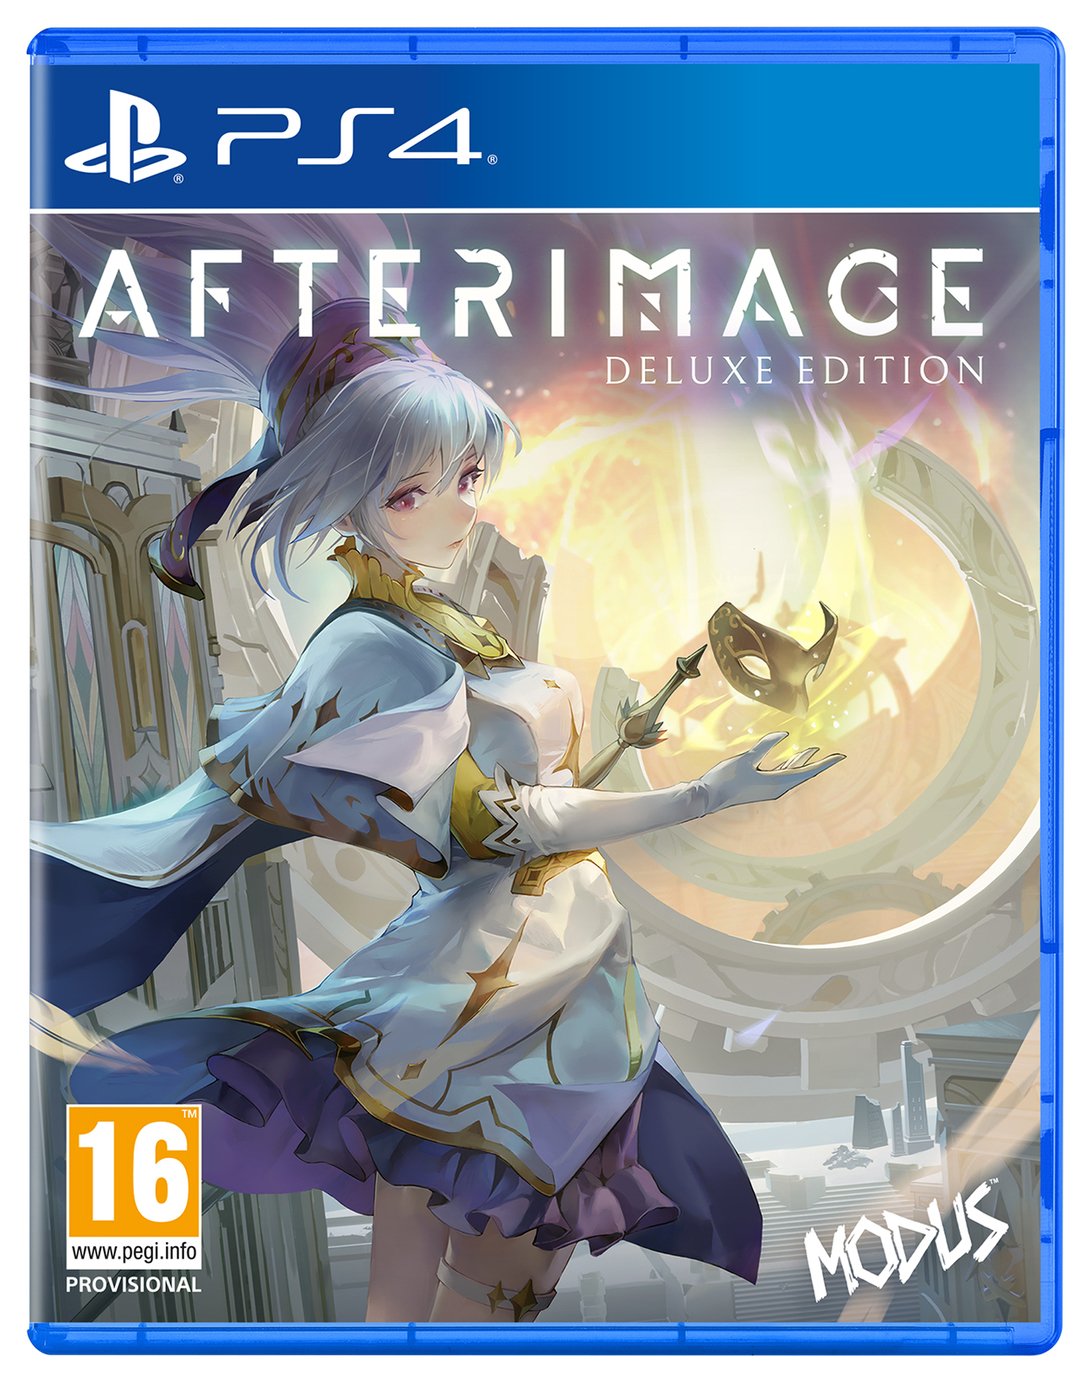 Afterimage Deluxe Edition PS4 Game